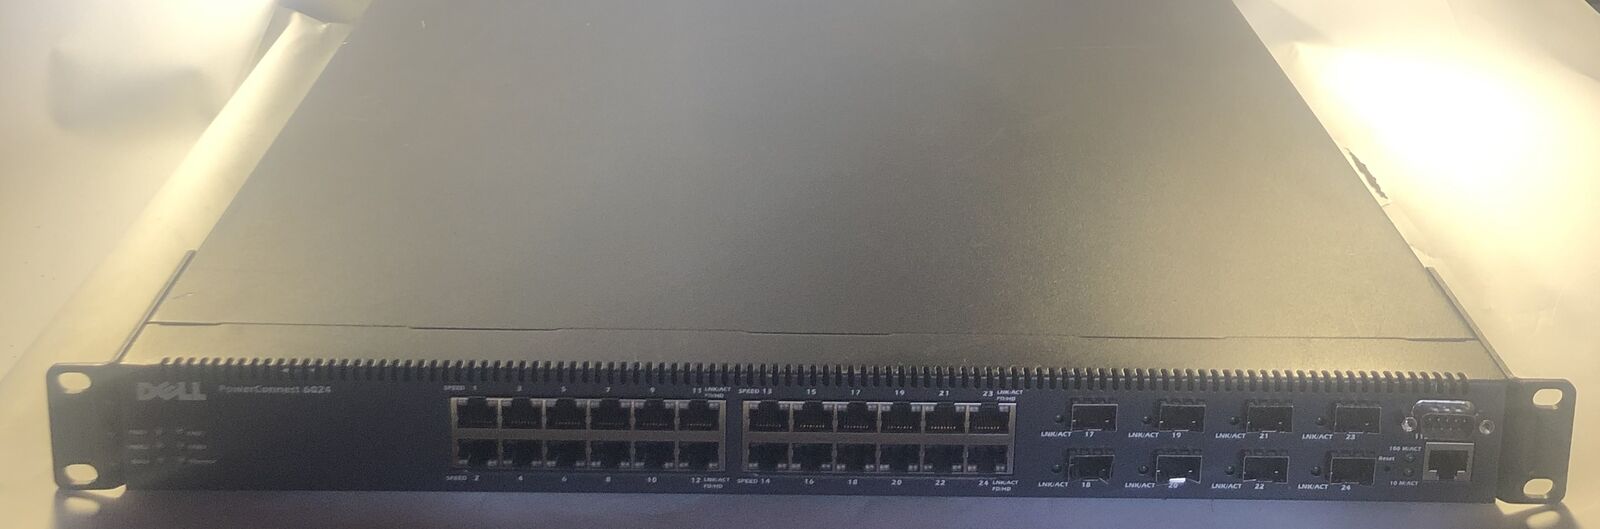 Dell PowerConnect 6024 24-Port Gigabit Network Switch